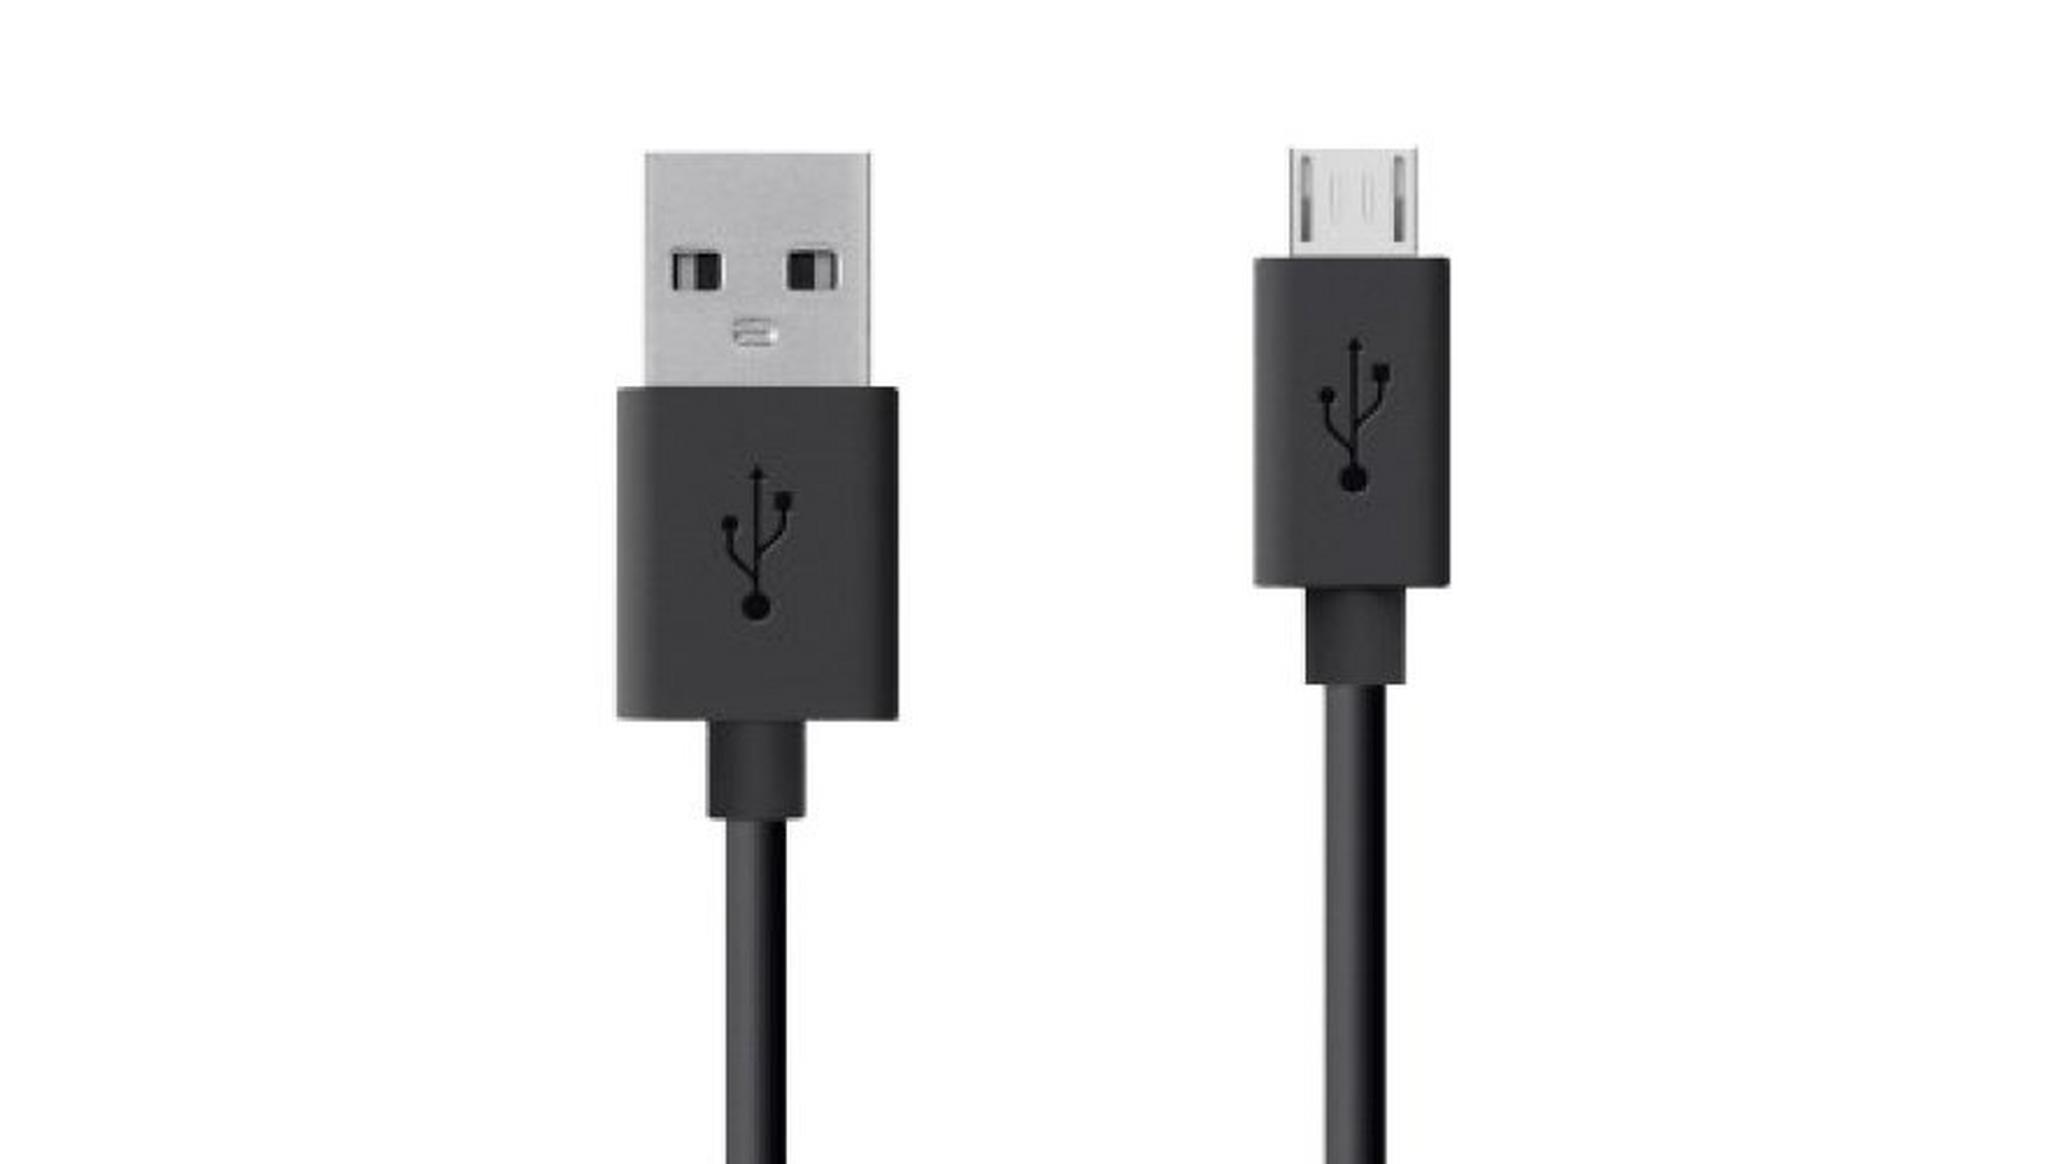 Belkin Mixit 2m Micro USB Cable for Smartphones and Tablets - Black (F2CU012bt2M-BLK)